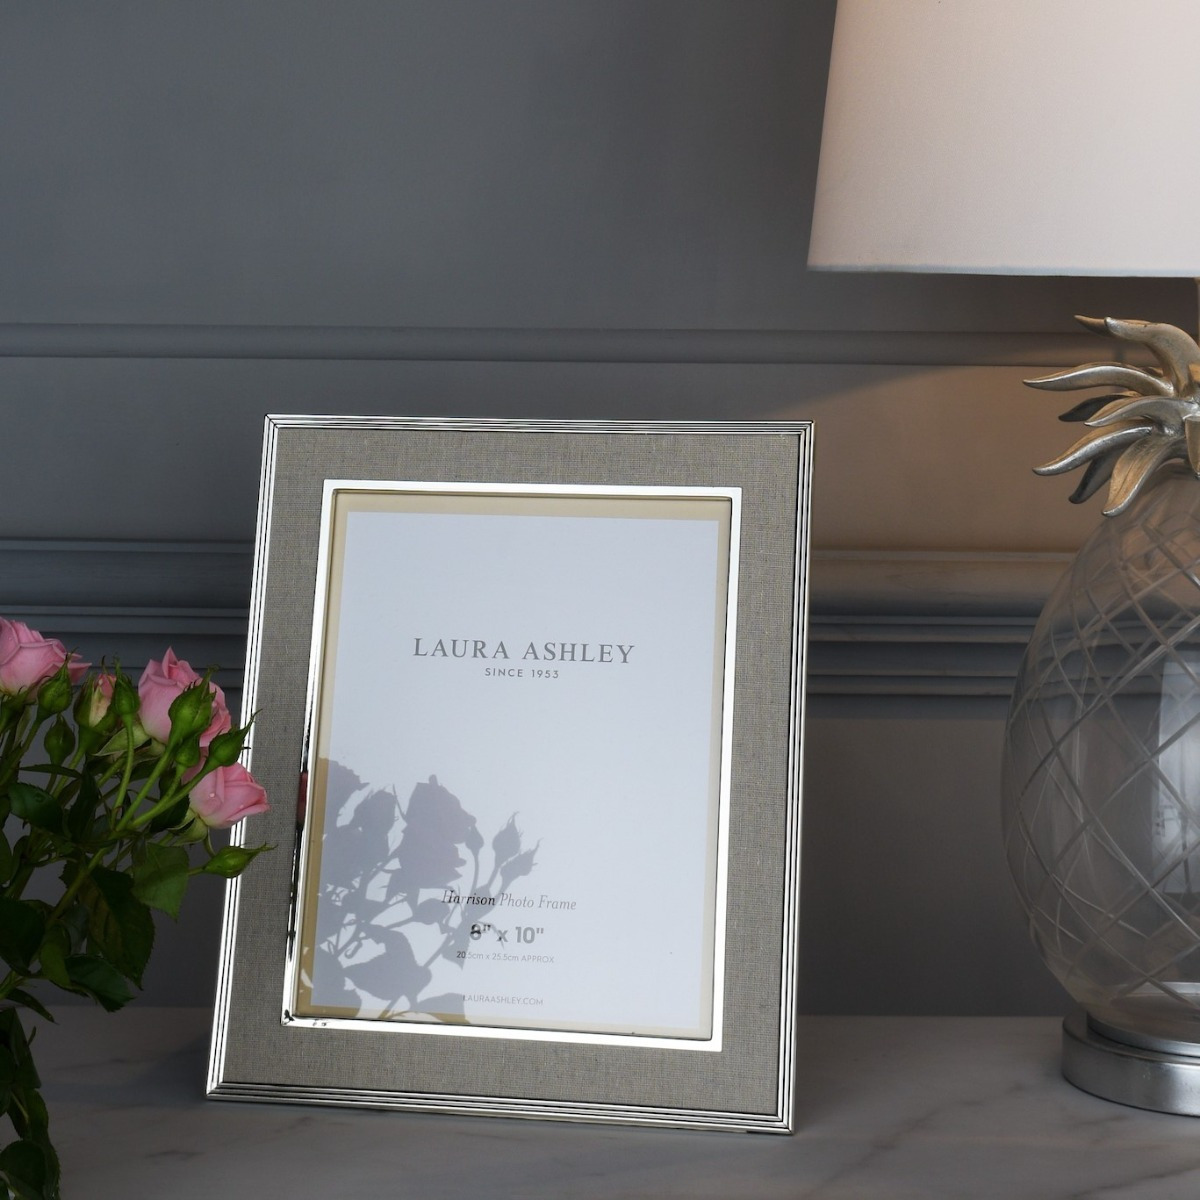 Laura Ashley Harrison Photo Frame In Polished Silver Finish With